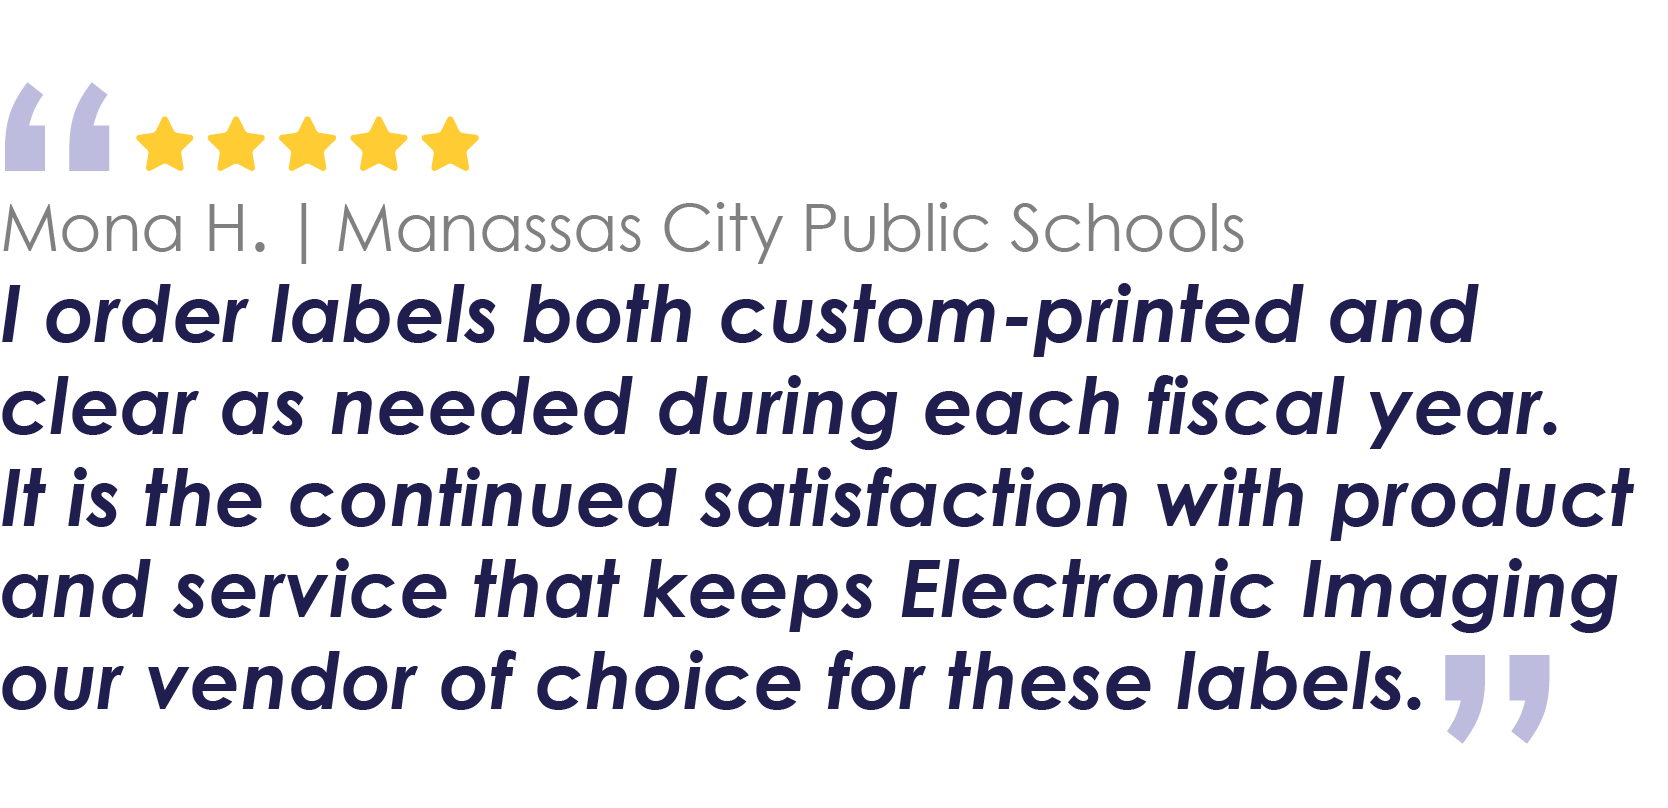 Mona H. | Manassas City Public Schools
The labels used by us in the IT Department of a school division are primarily for inventory and tracking purposes. The various labels provided by Electronic Imaging are adjusted to our requested specifications and currently meet our needs.